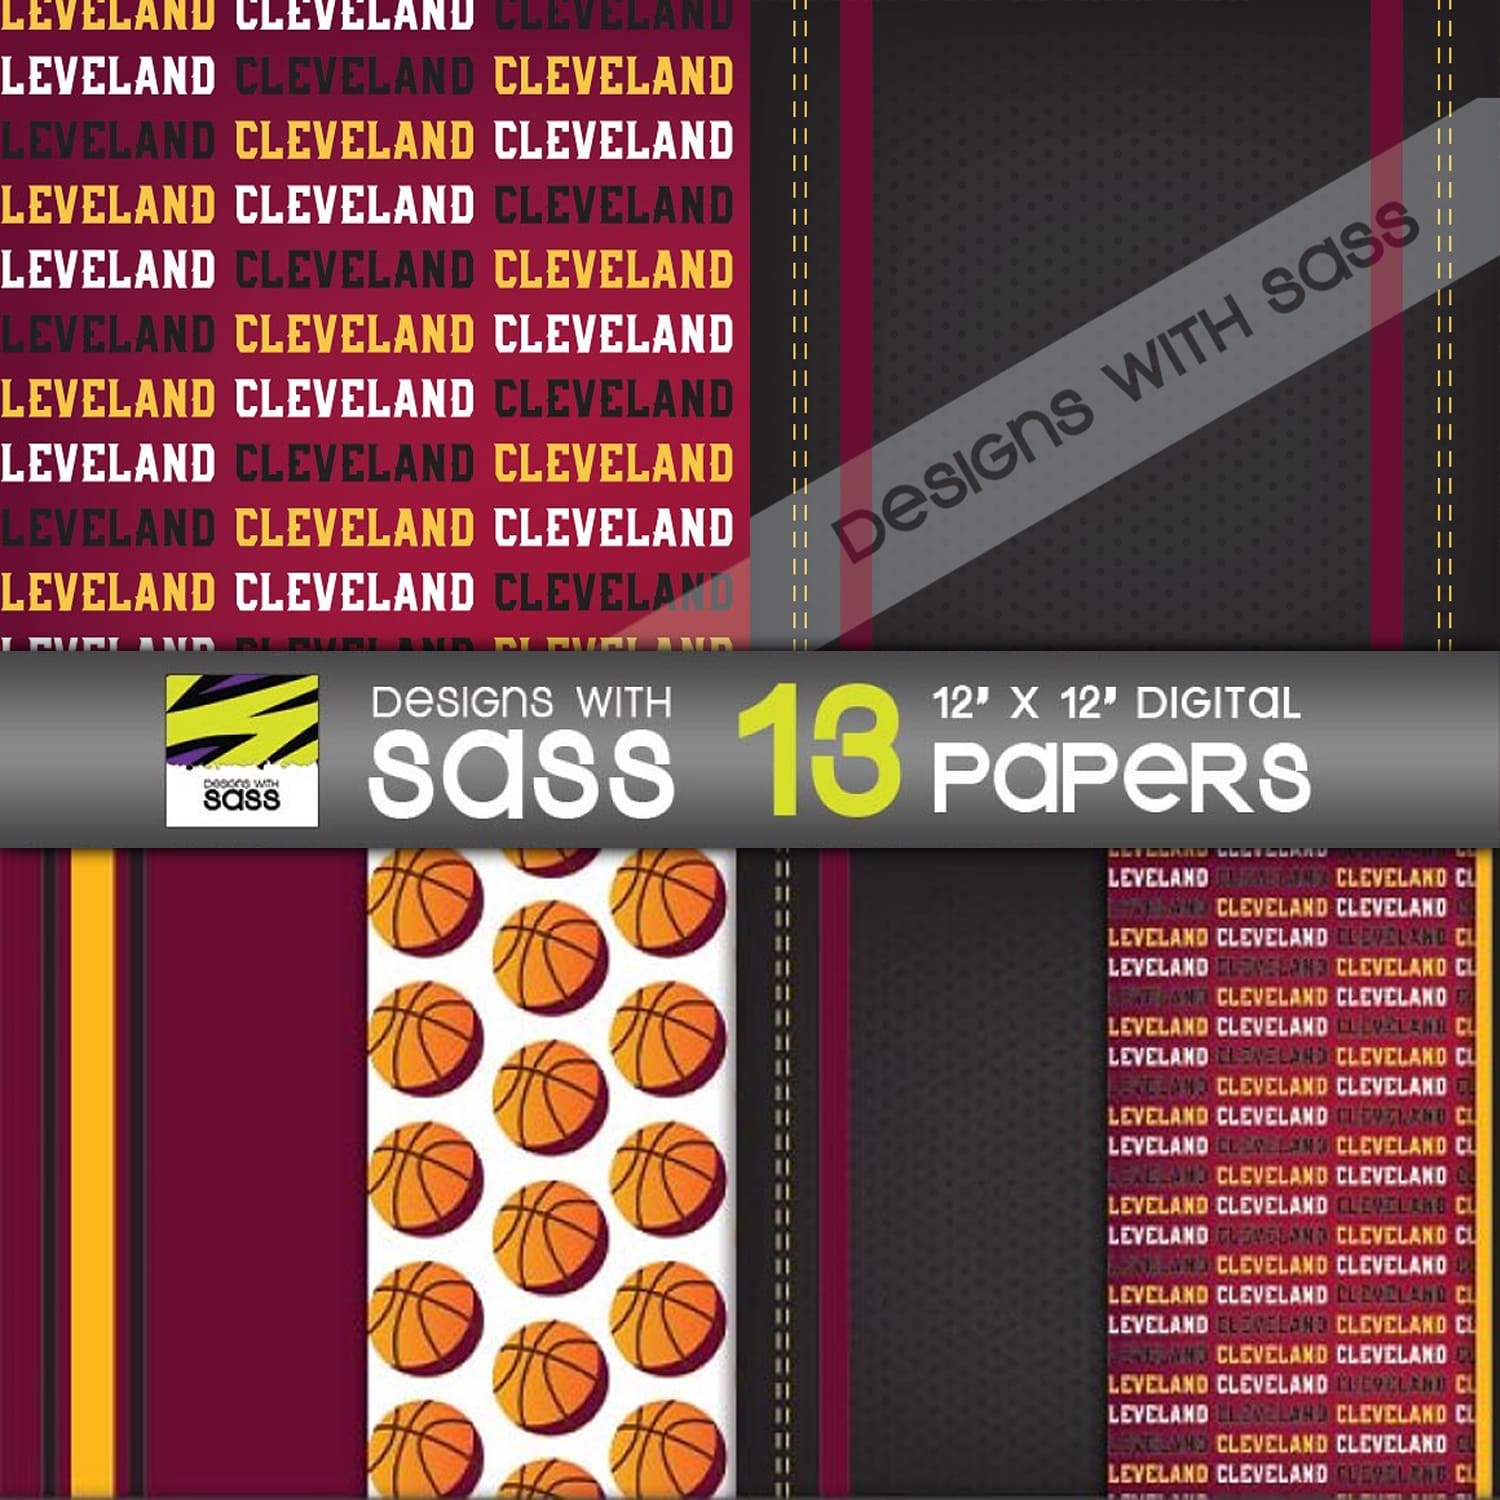 Cleveland Basketball Digital Paper created by designswithsass.